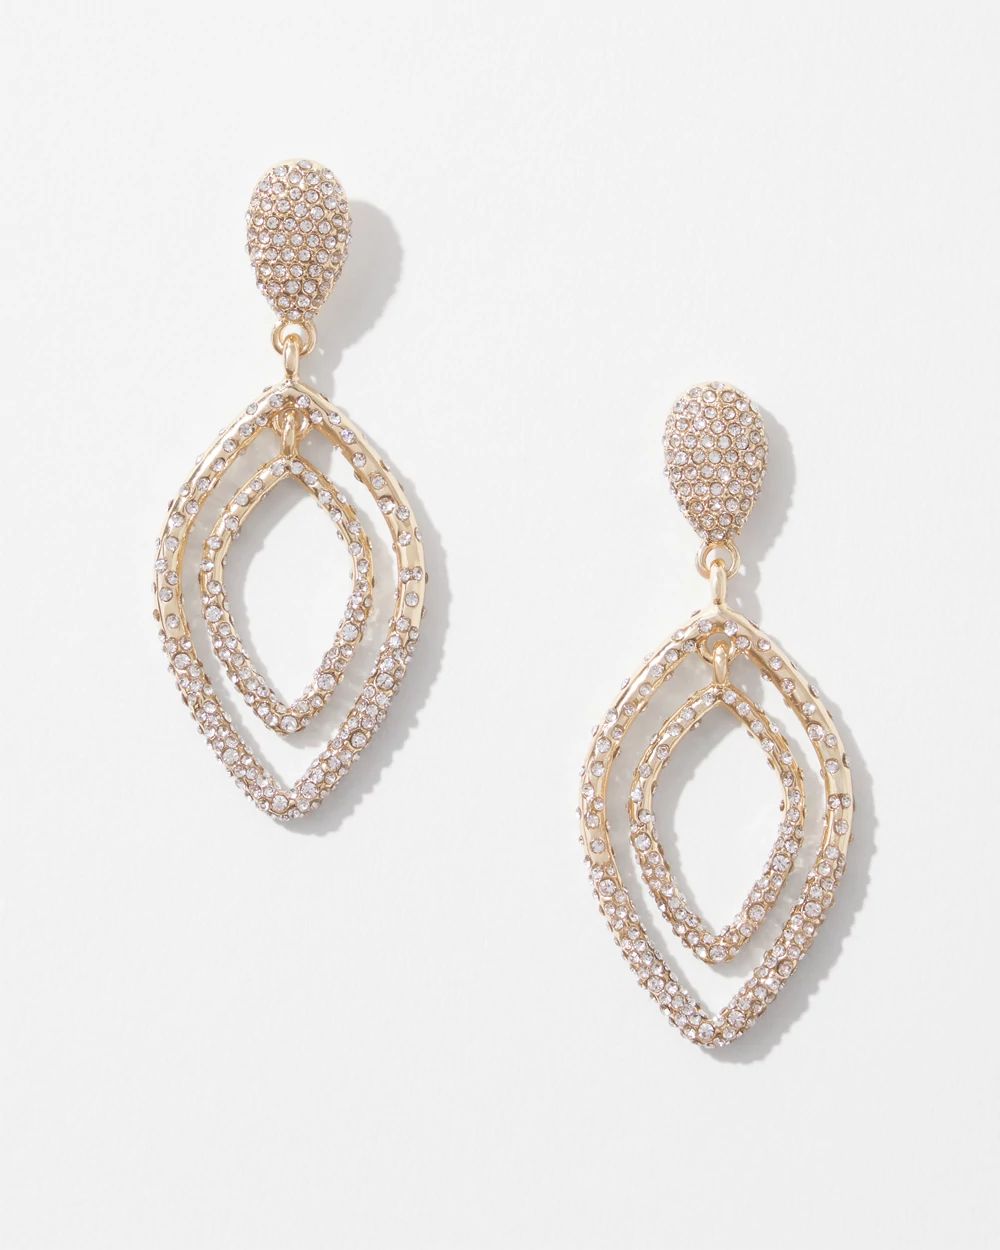 Gold-Dusted Pave Pedant Earrings click to view larger image.